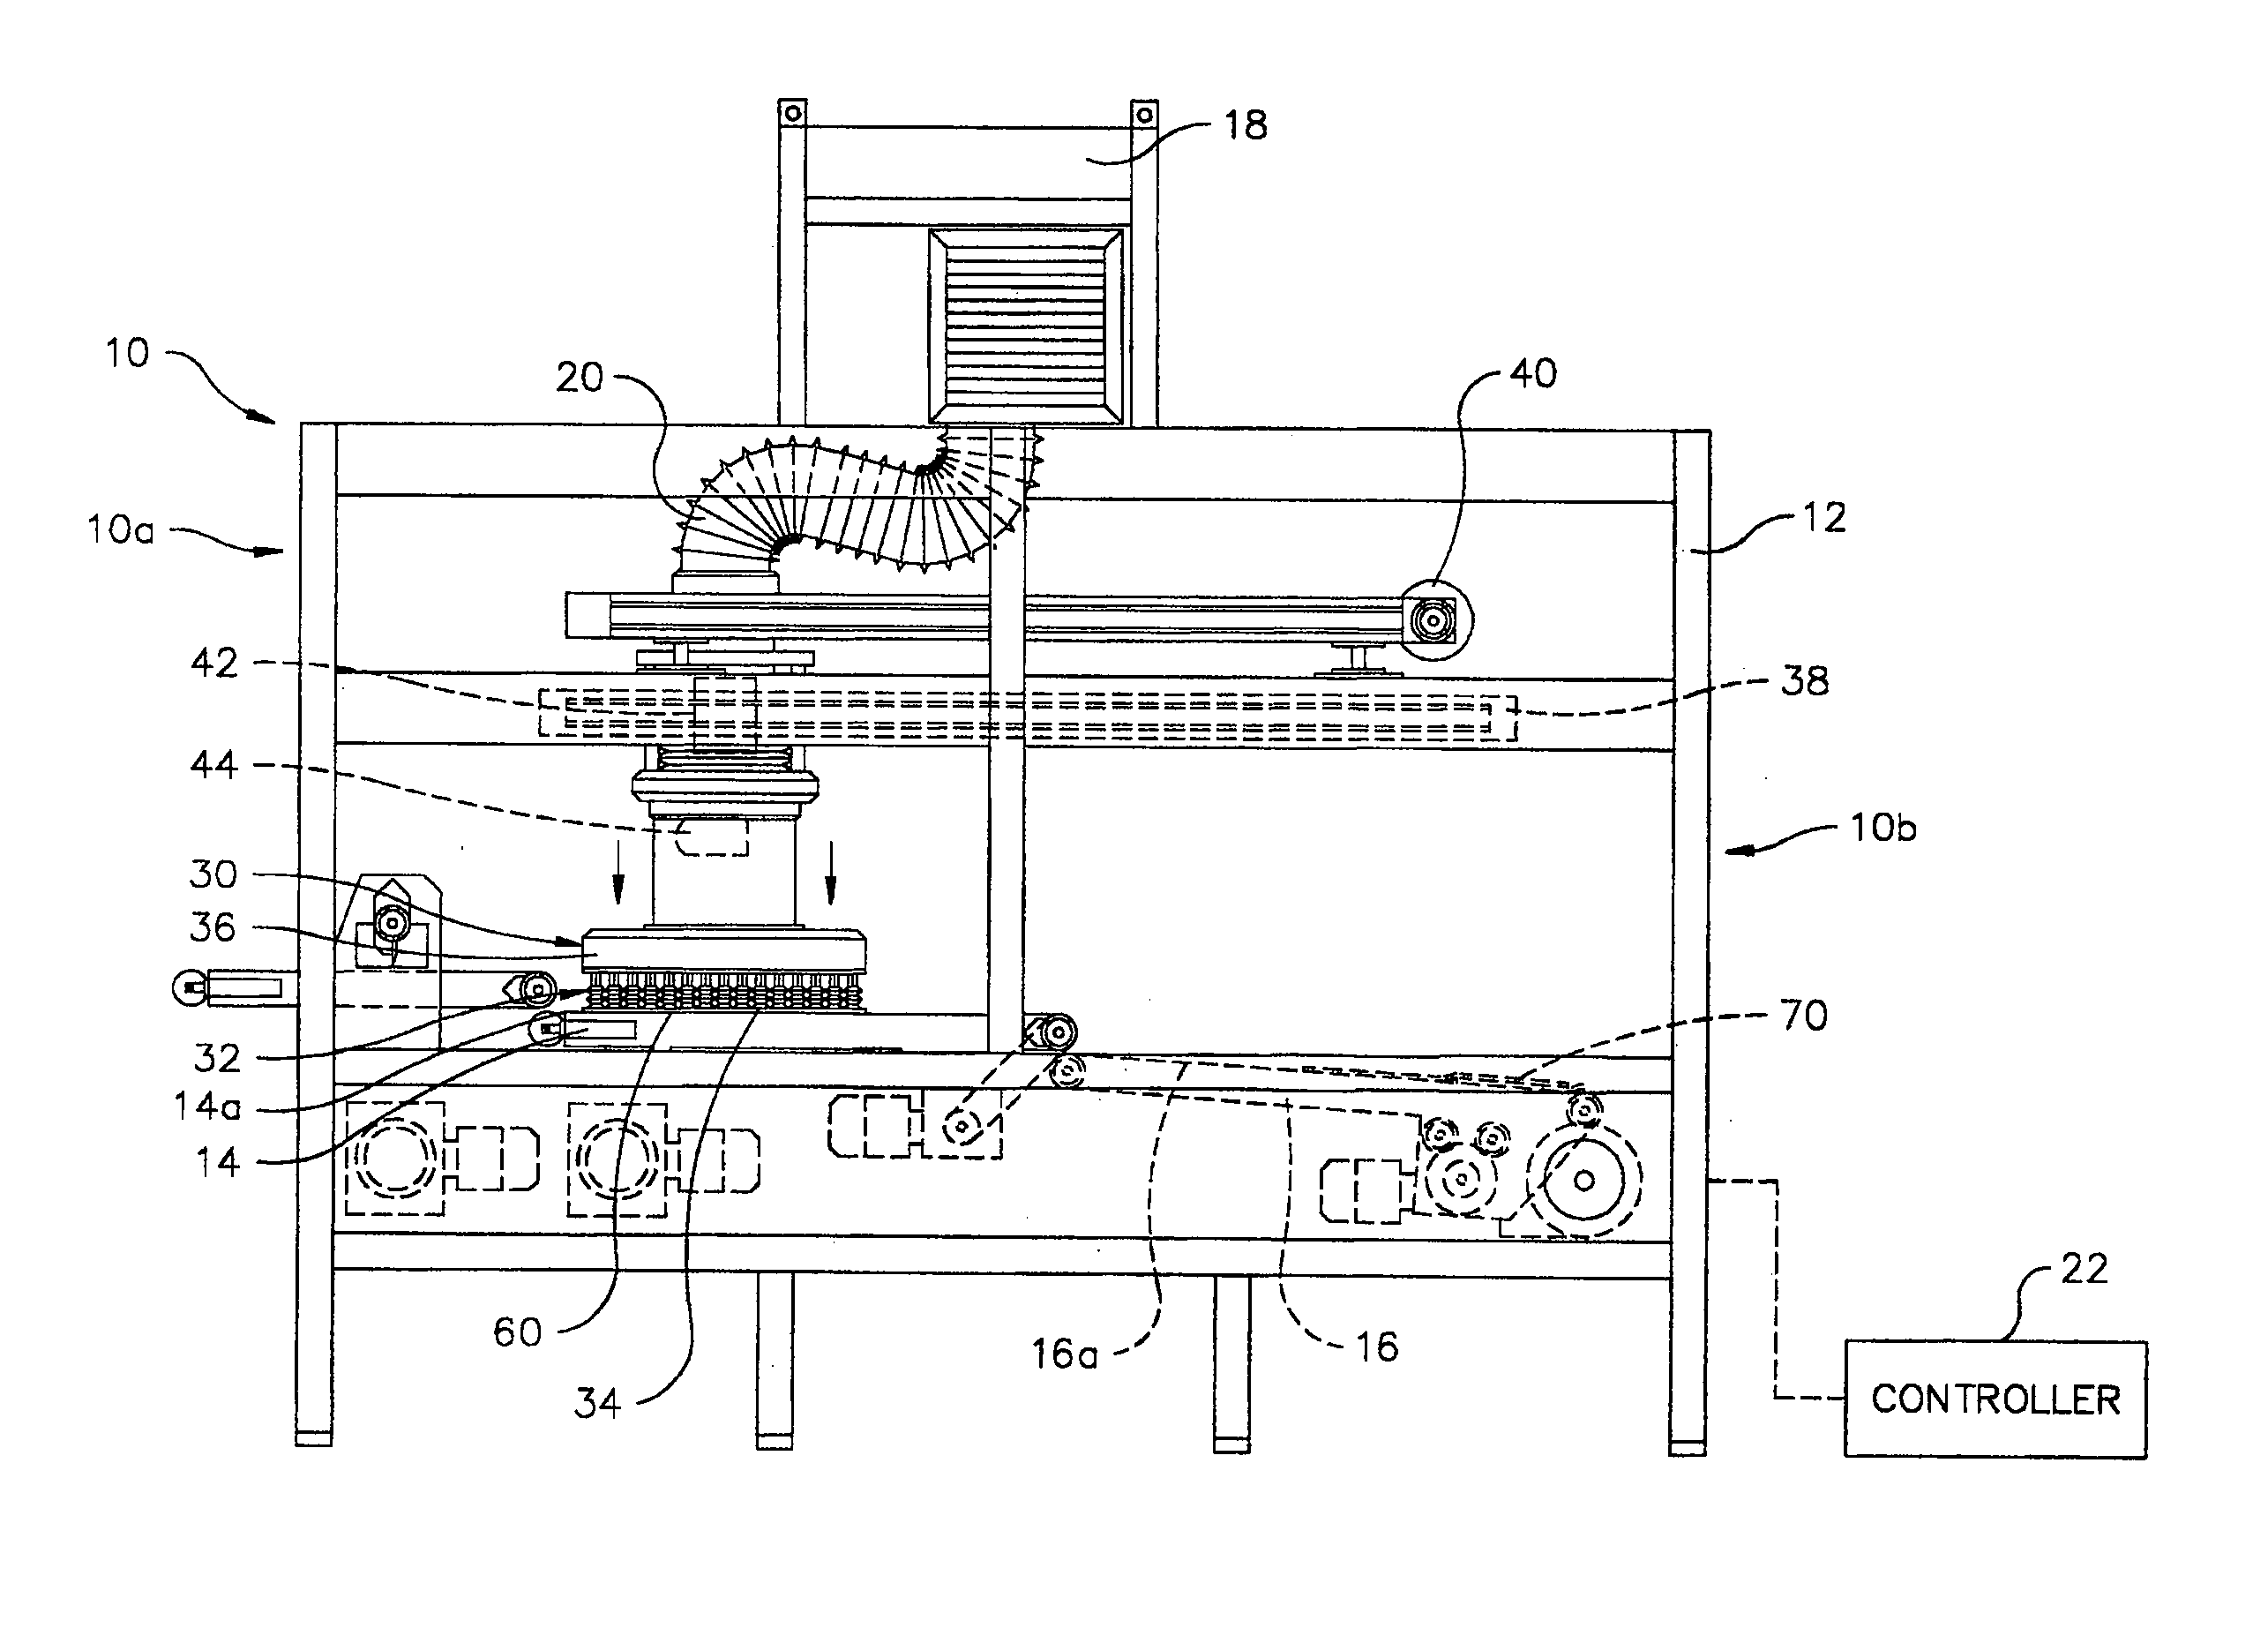 Apparatus and Method for Movement and Rotation of Dough Sheets to Produce a Bakery Products